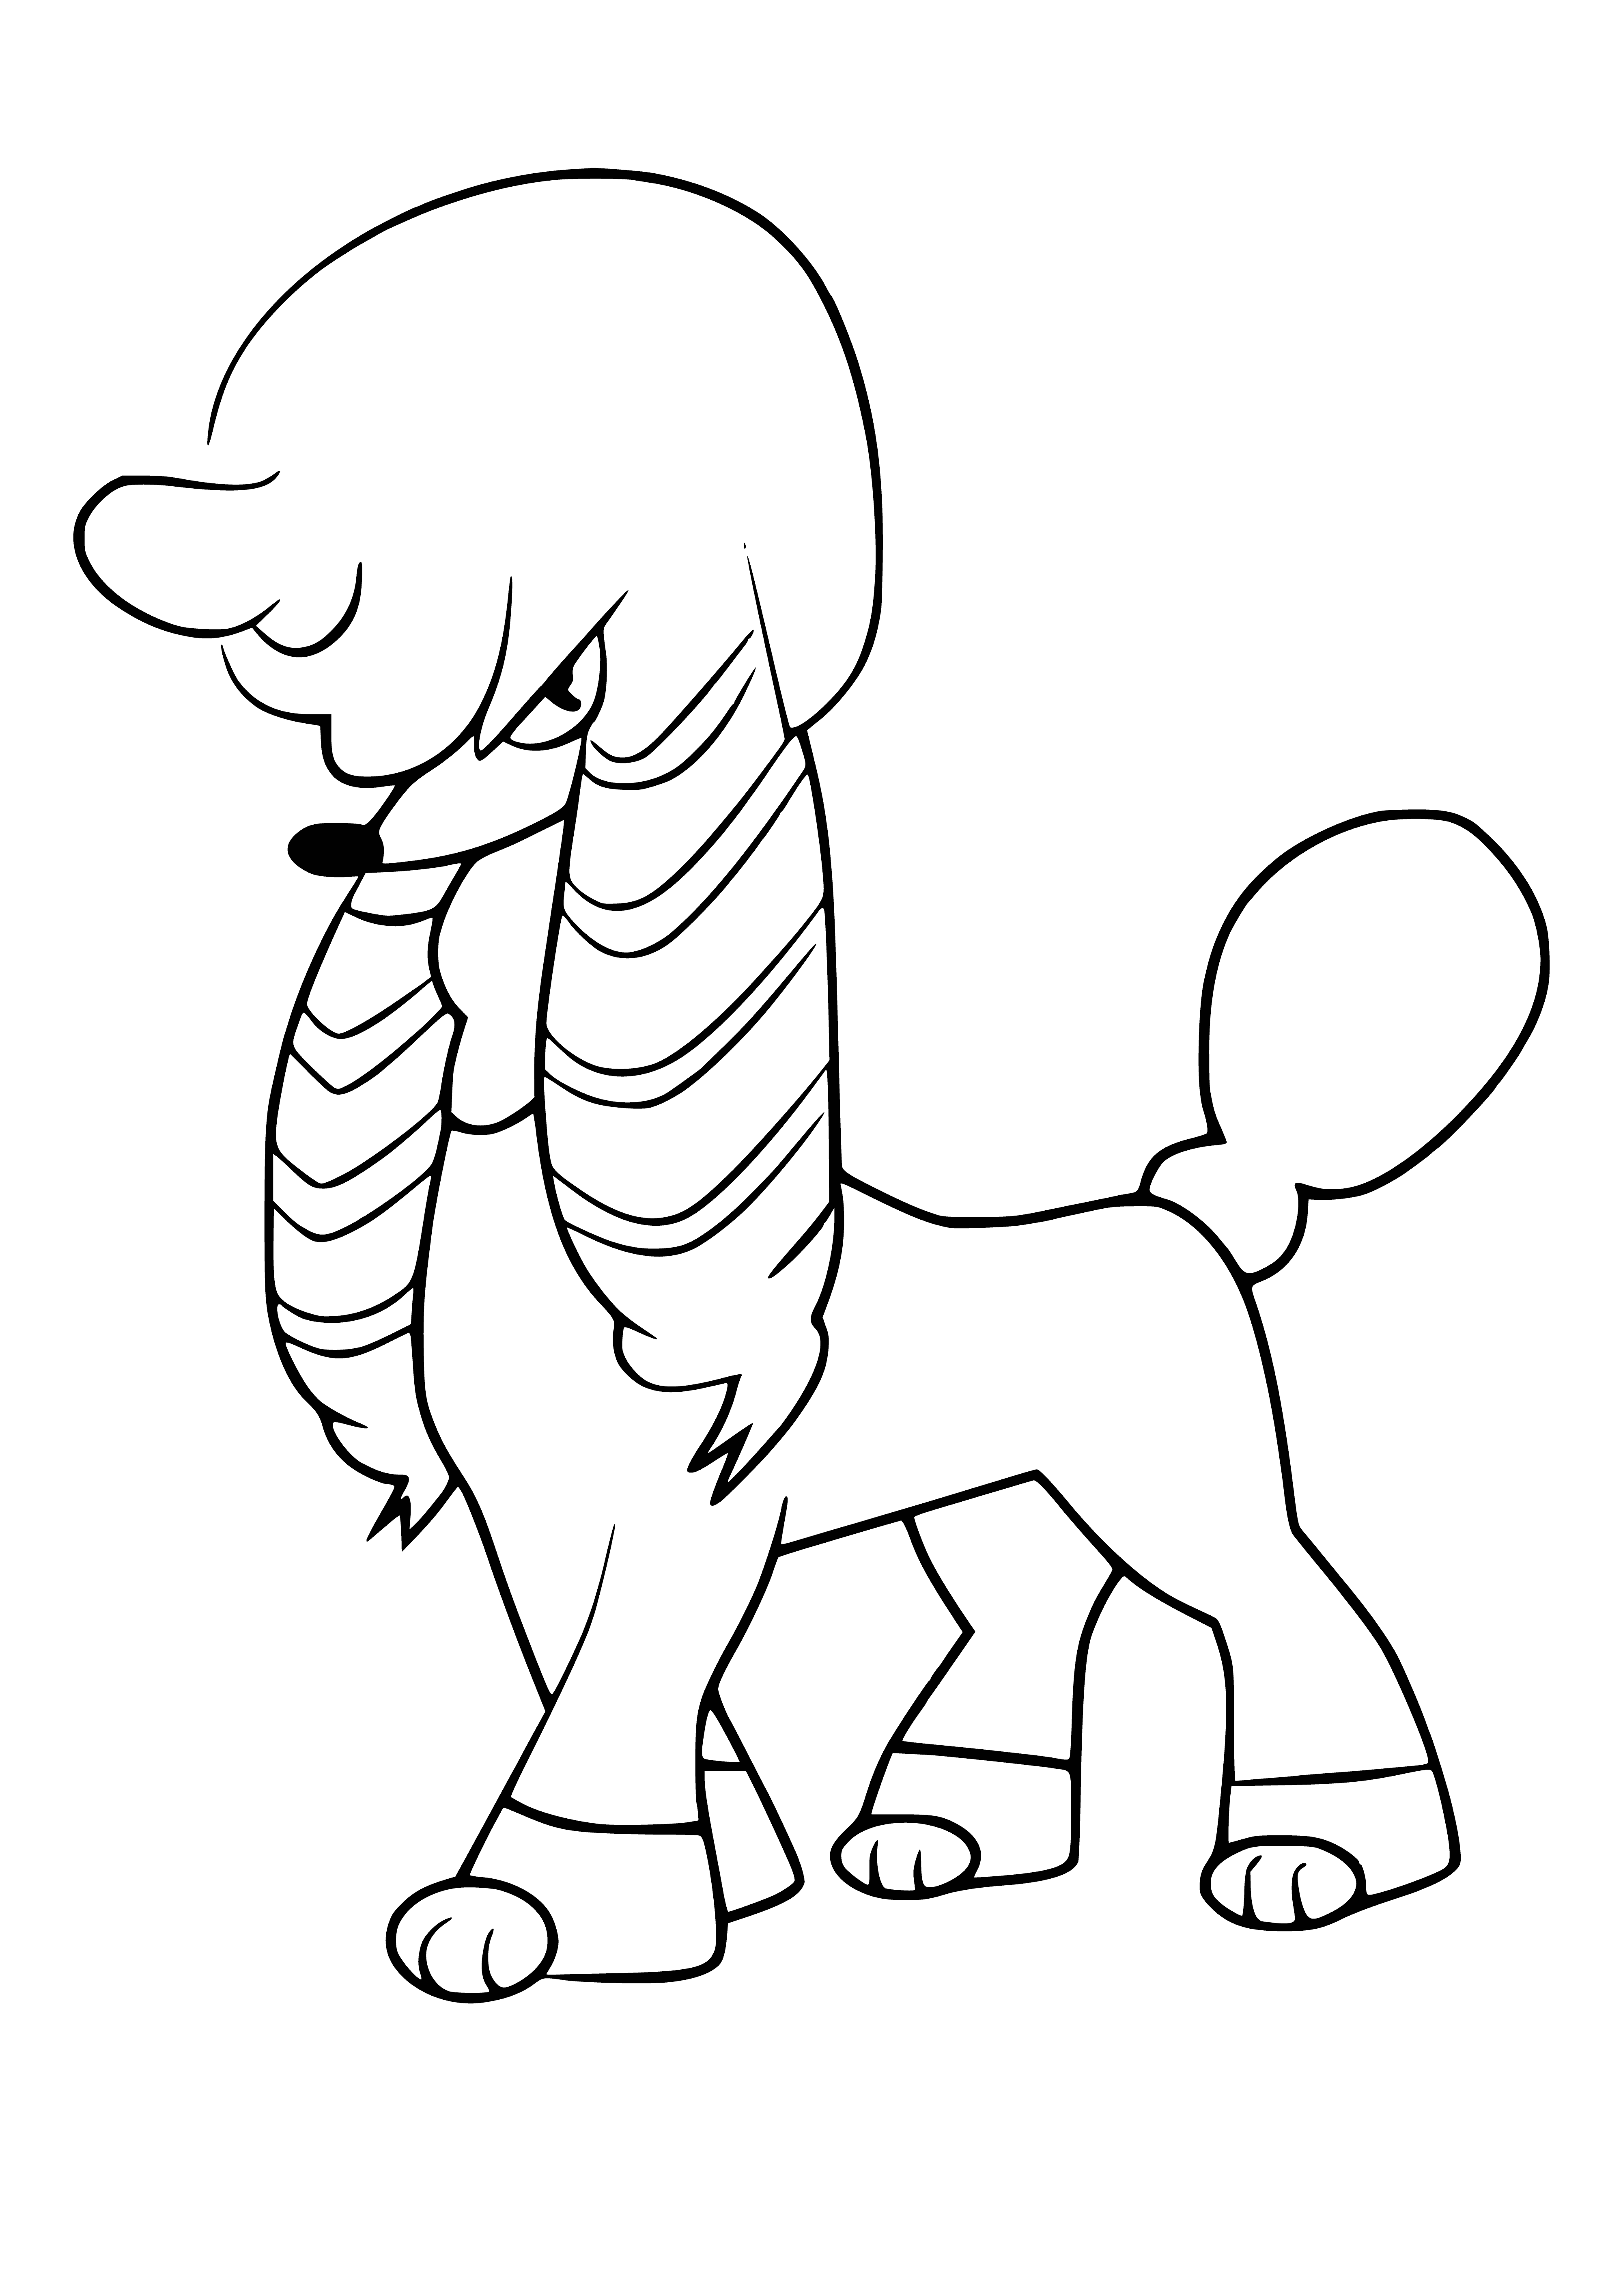 Pokemon Furfrou. Queen style coloring page